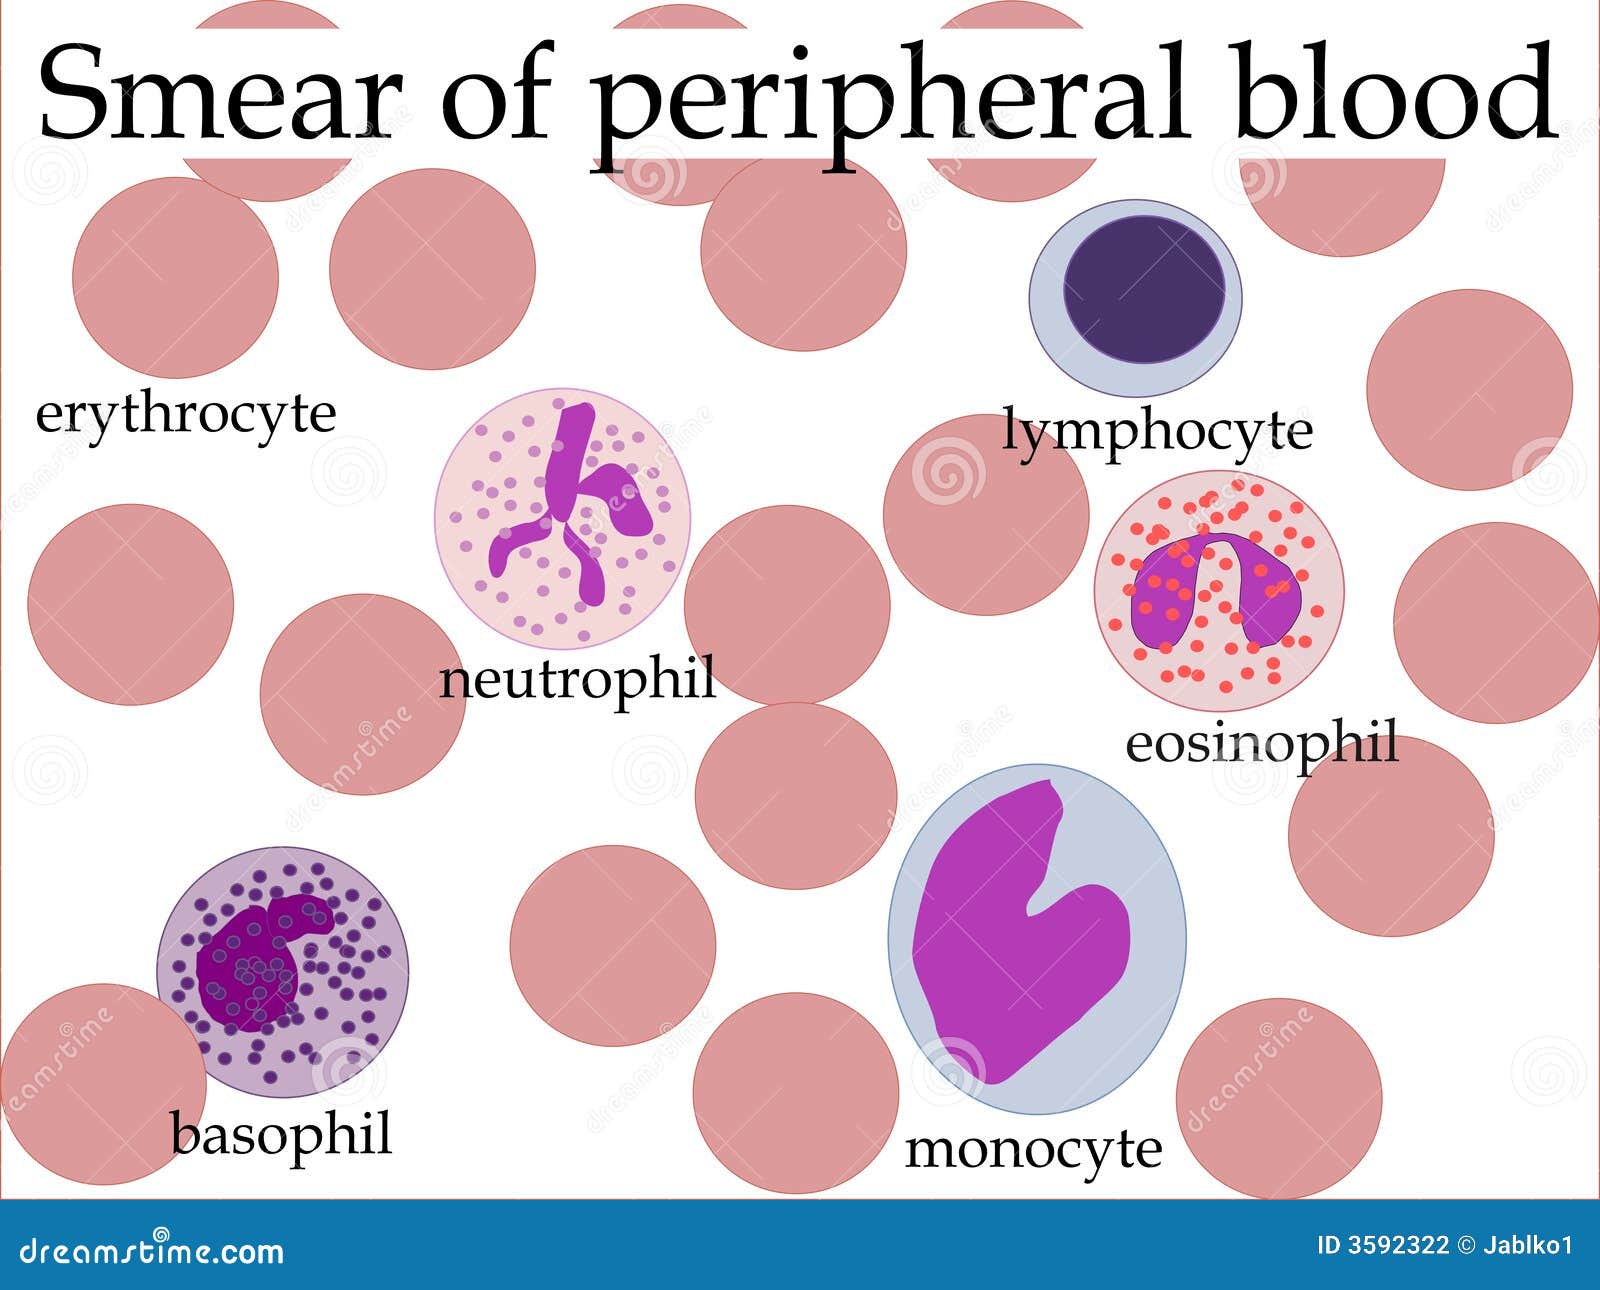 Smear of peripheral blood stock vector. Illustration of learn - 3592322